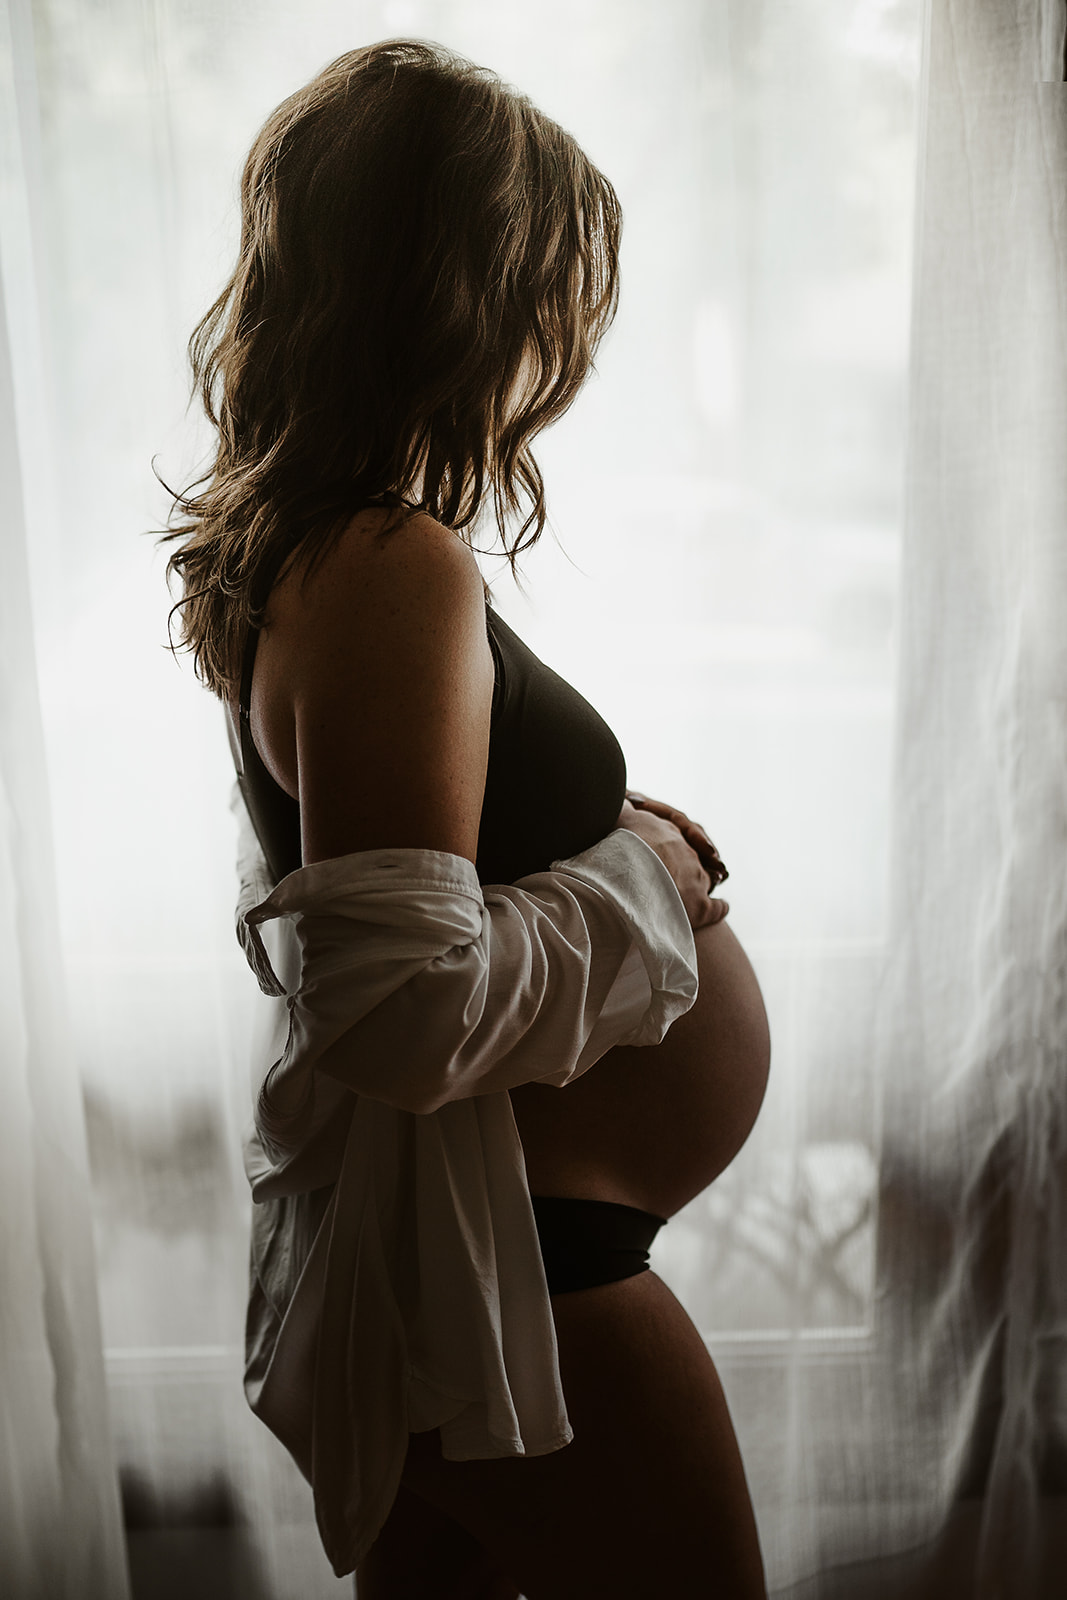 New mother with her pregnant belly standing in a white shirt by window light